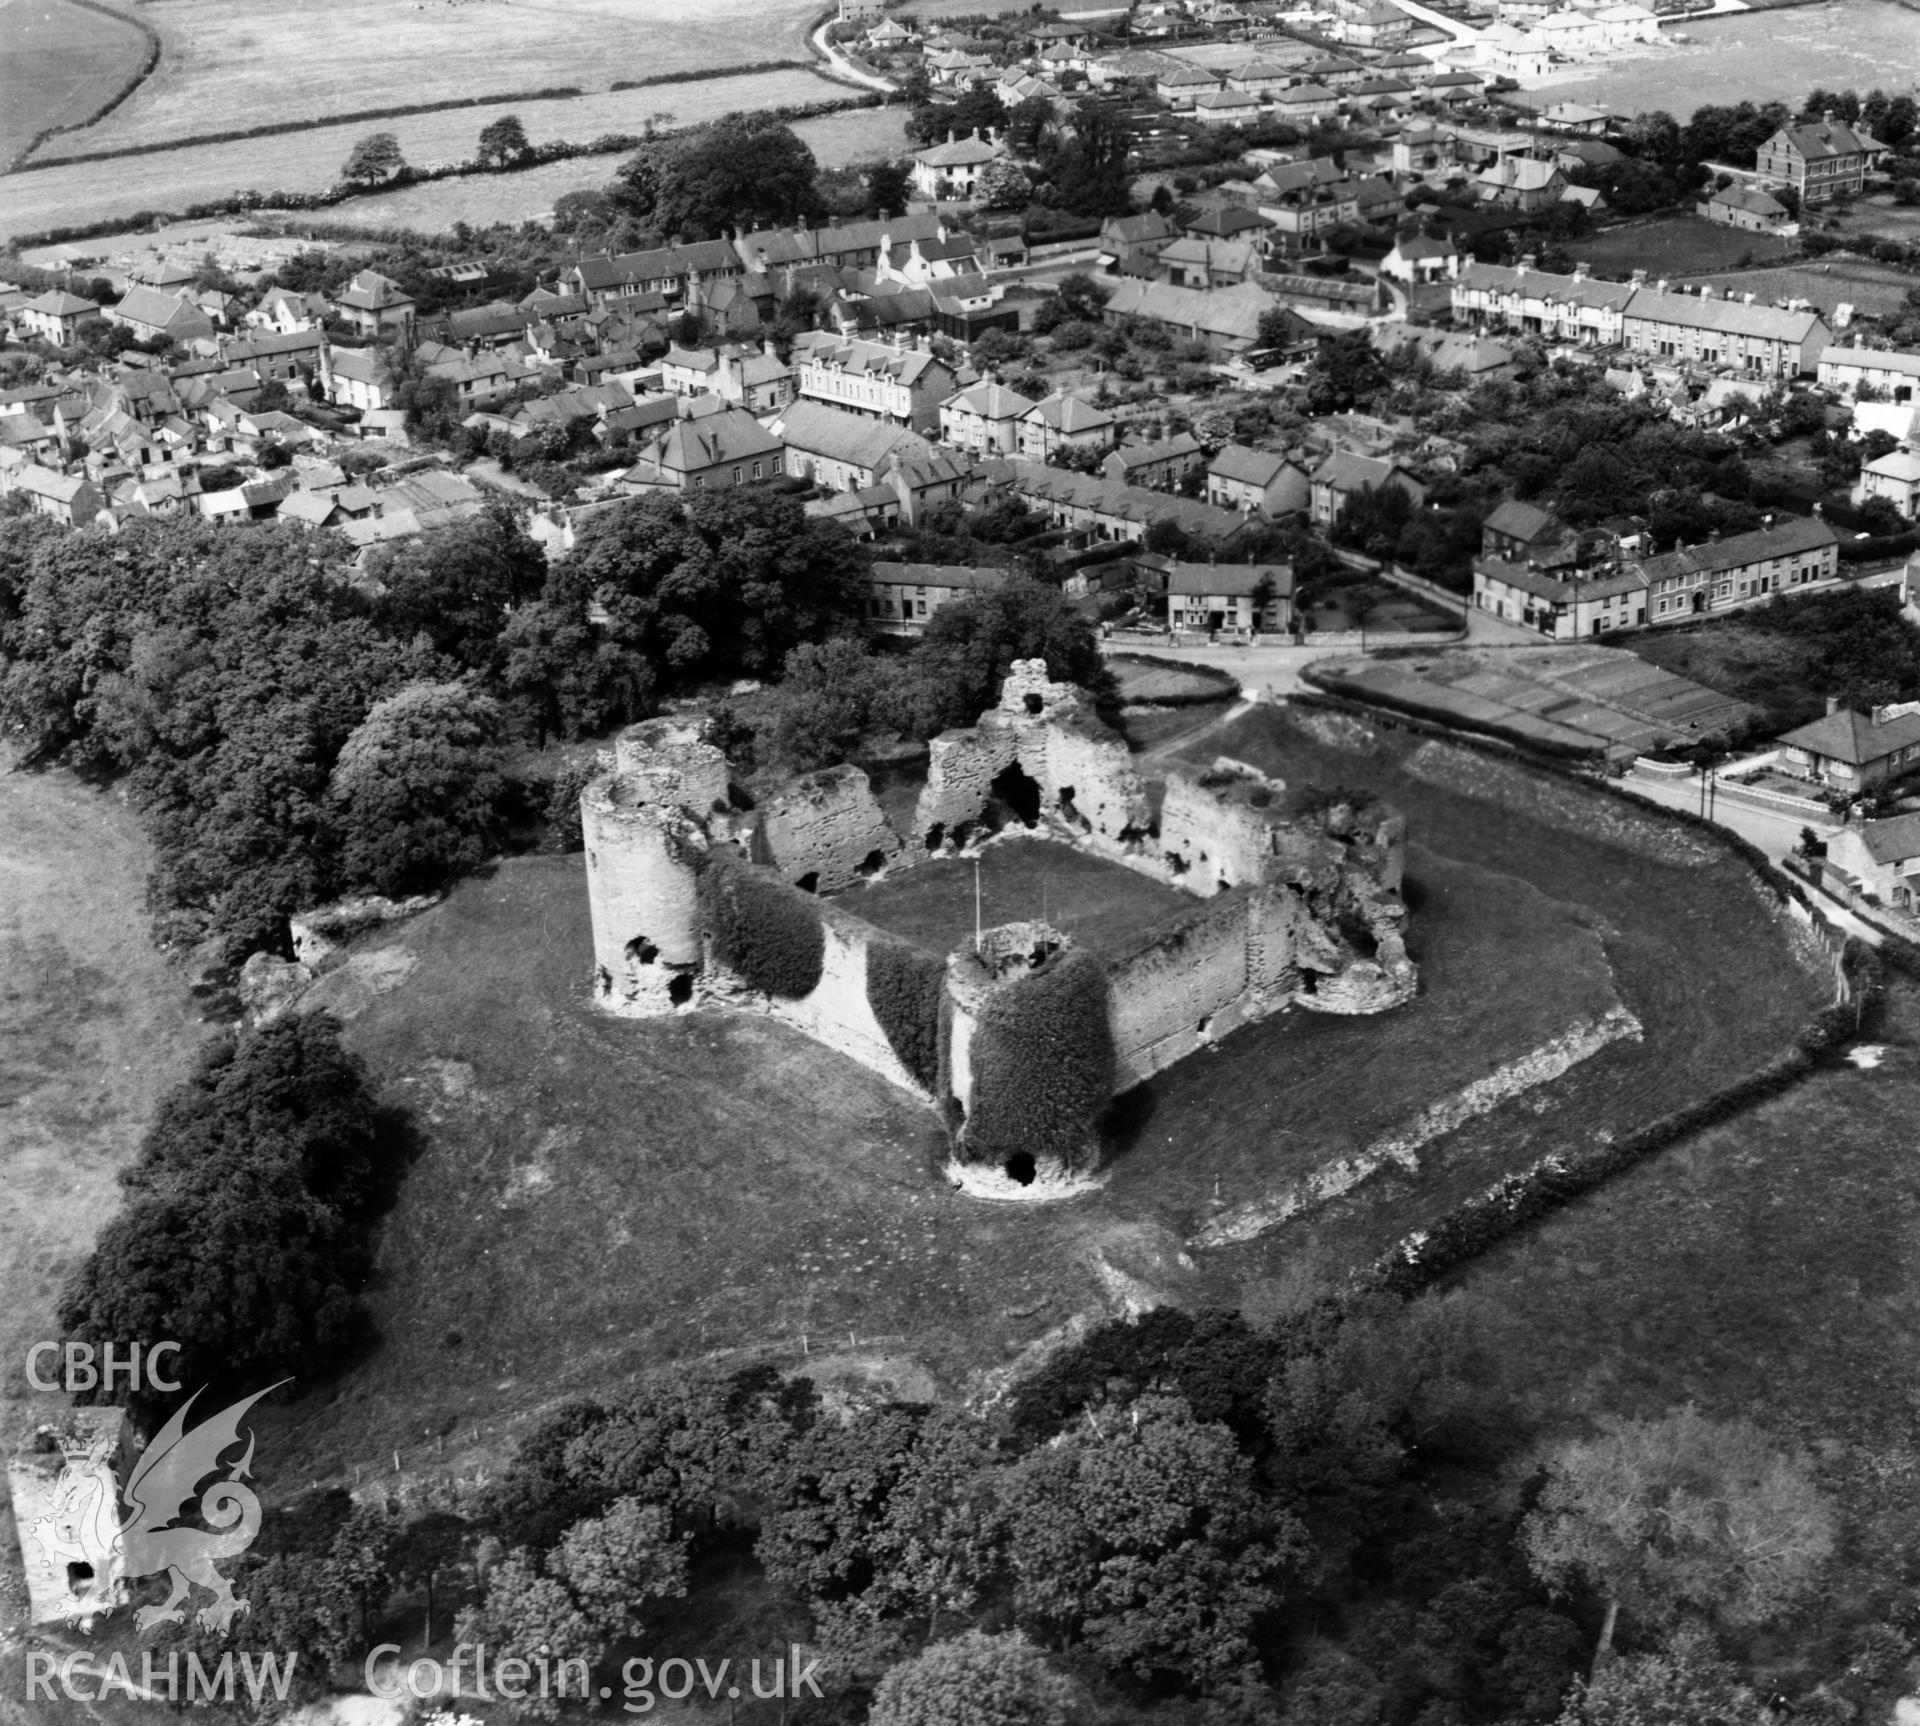 View of Rhuddlan showing castle. Oblique aerial photograph, 5?" cut roll film.